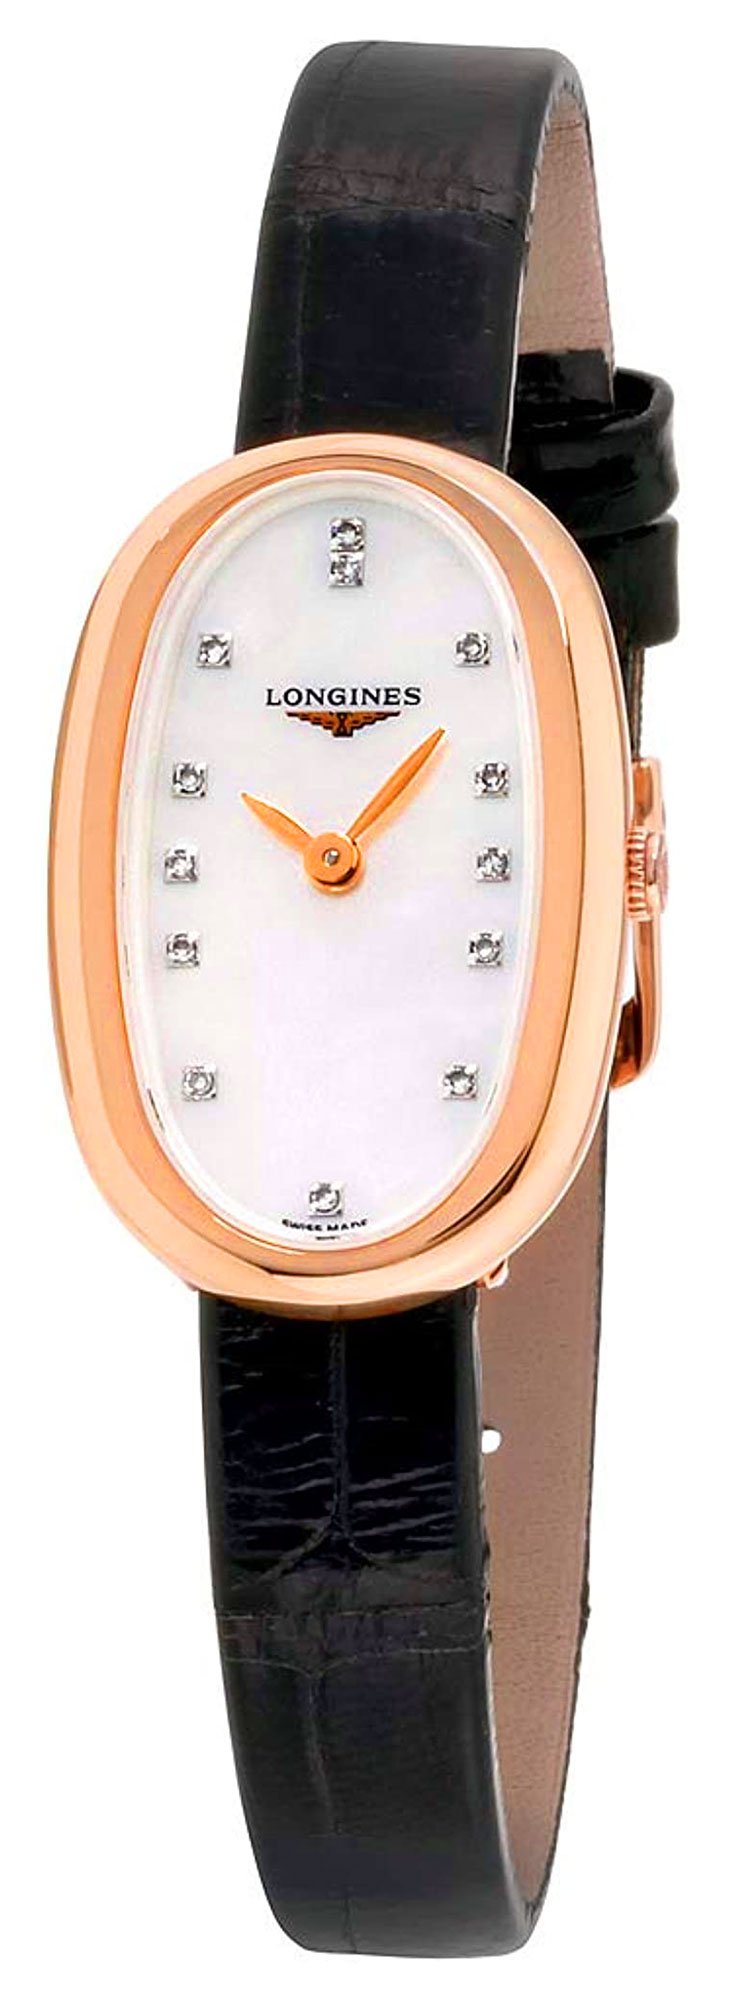 Watches - Womens-Longines-L23058870-25 - 30 mm, diamonds / gems, leather, Longines, mother-of-pearl, new arrivals, rose gold case, swiss quartz, Symphonette, watches, white, womens, womenswatches-Watches & Beyond